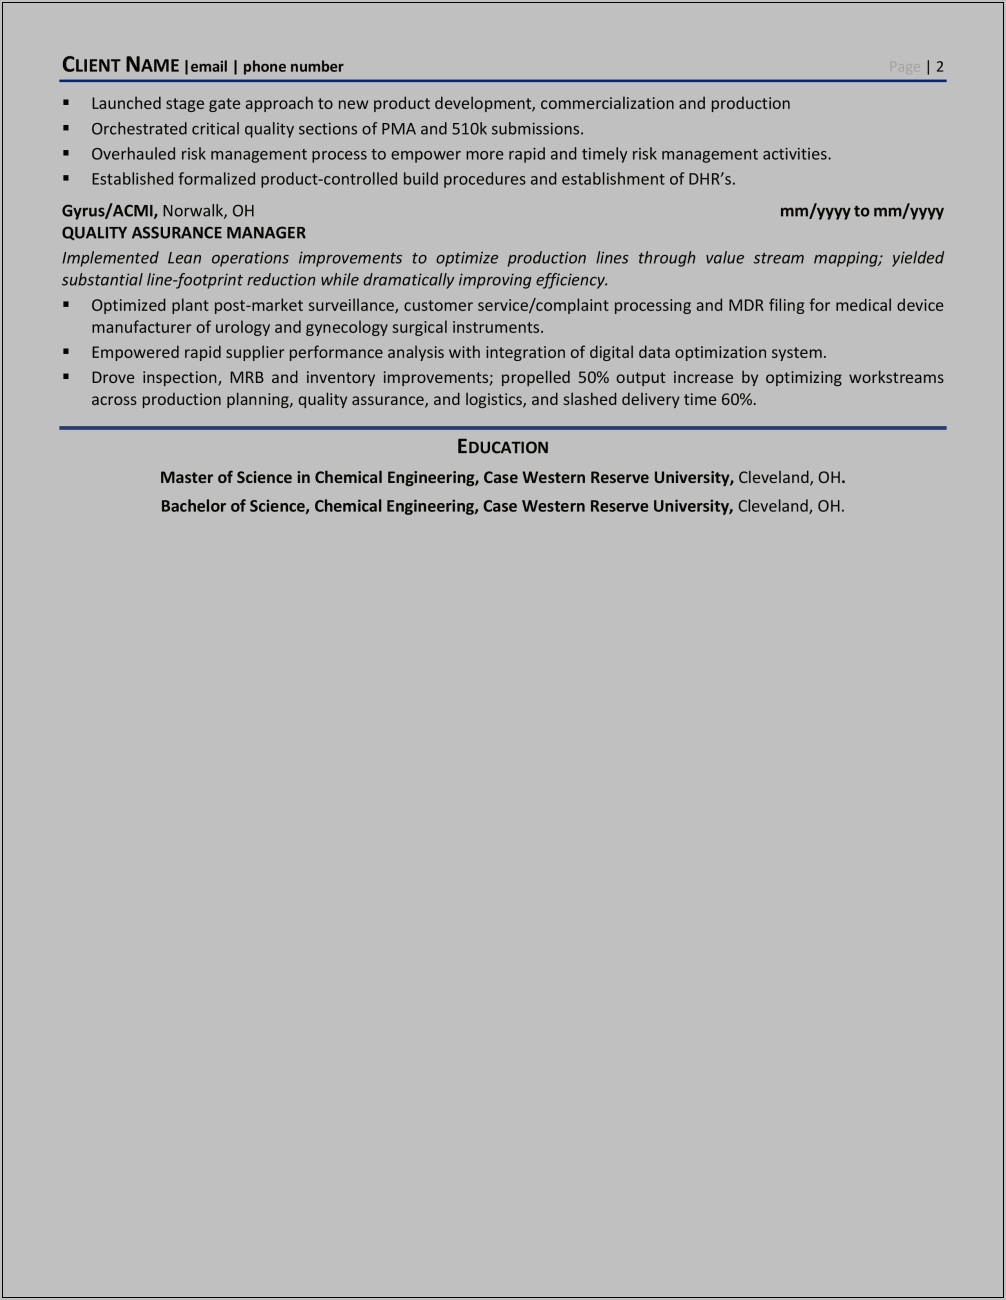 Typical Skills Chemical Engineer Resume